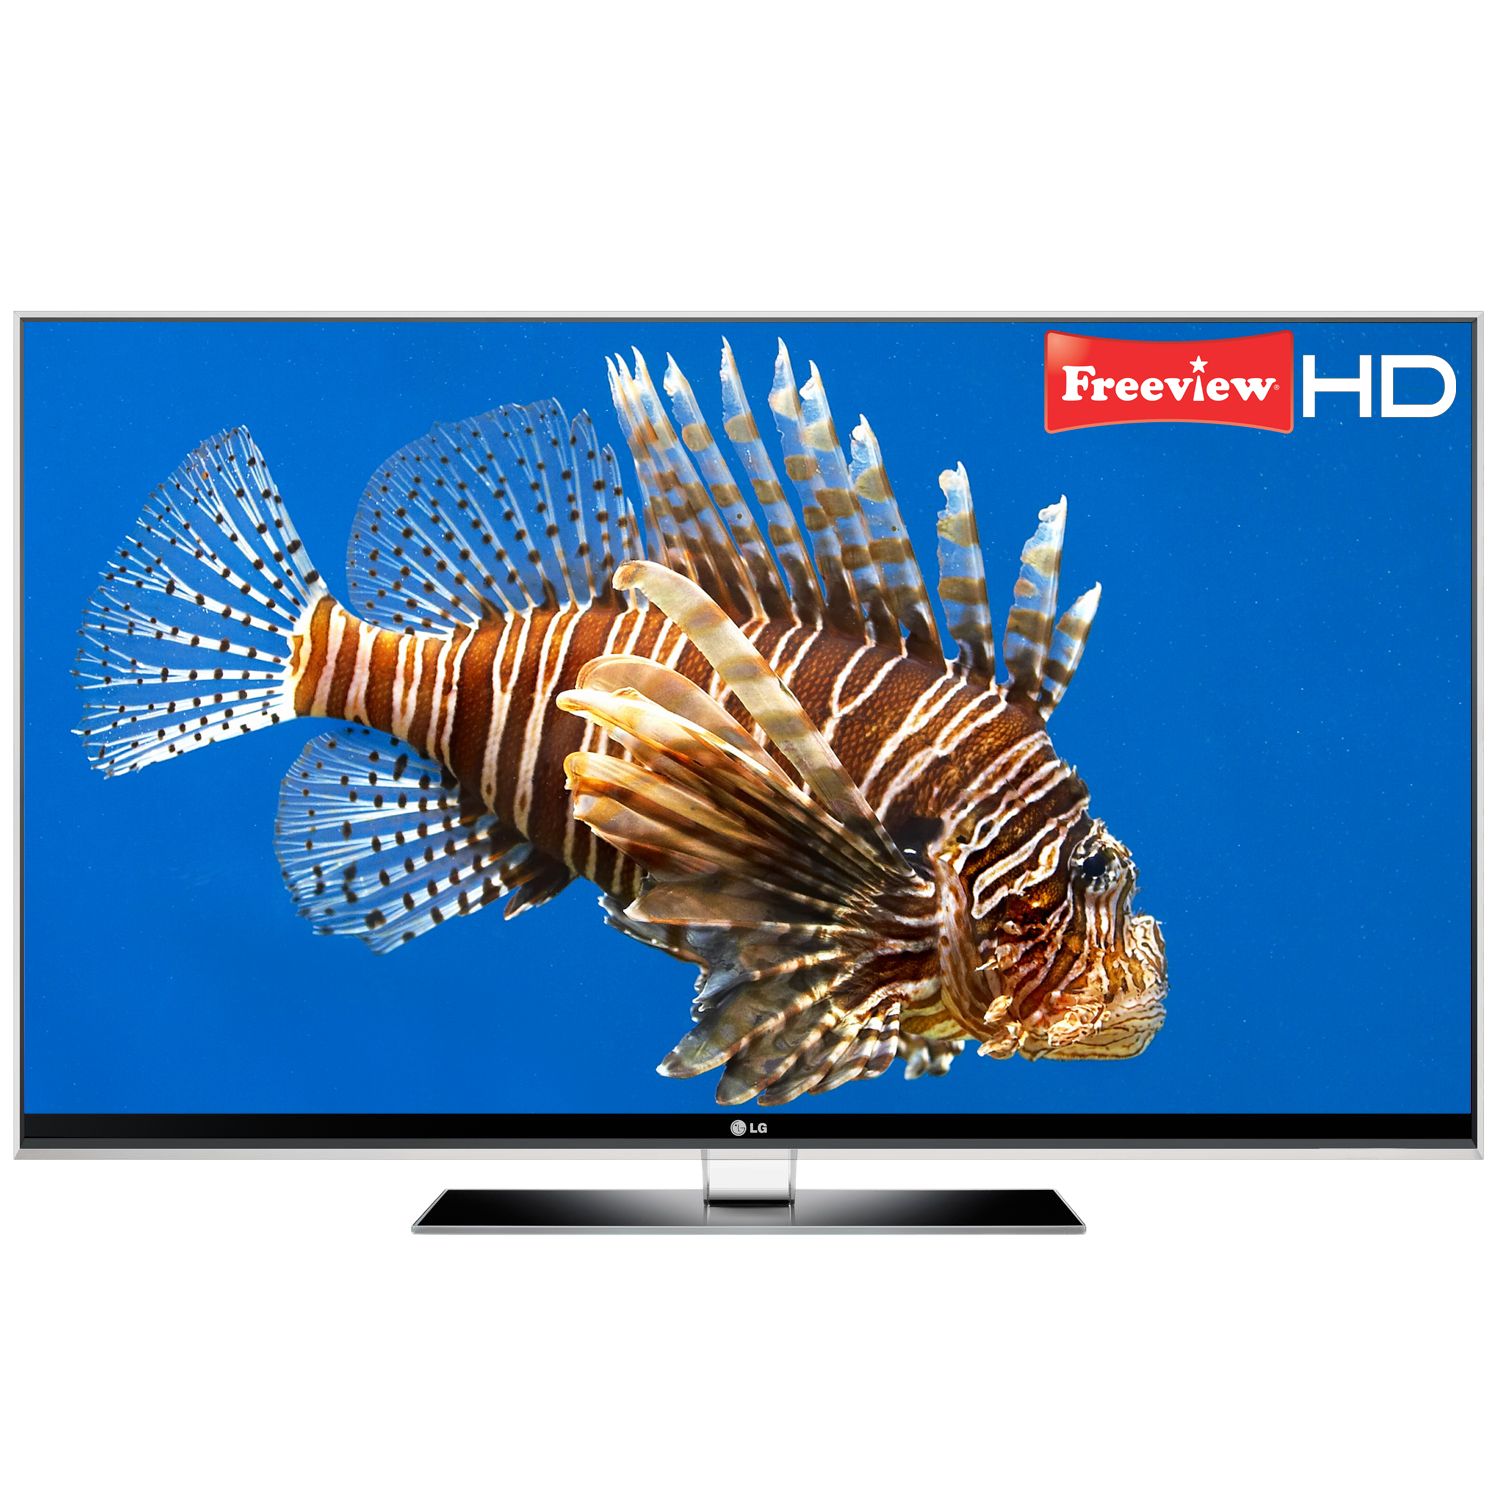 LG 47LX9900 LED HD 1080p 3D Digital Television, 47 Inch with Built-in Freeview HD at John Lewis